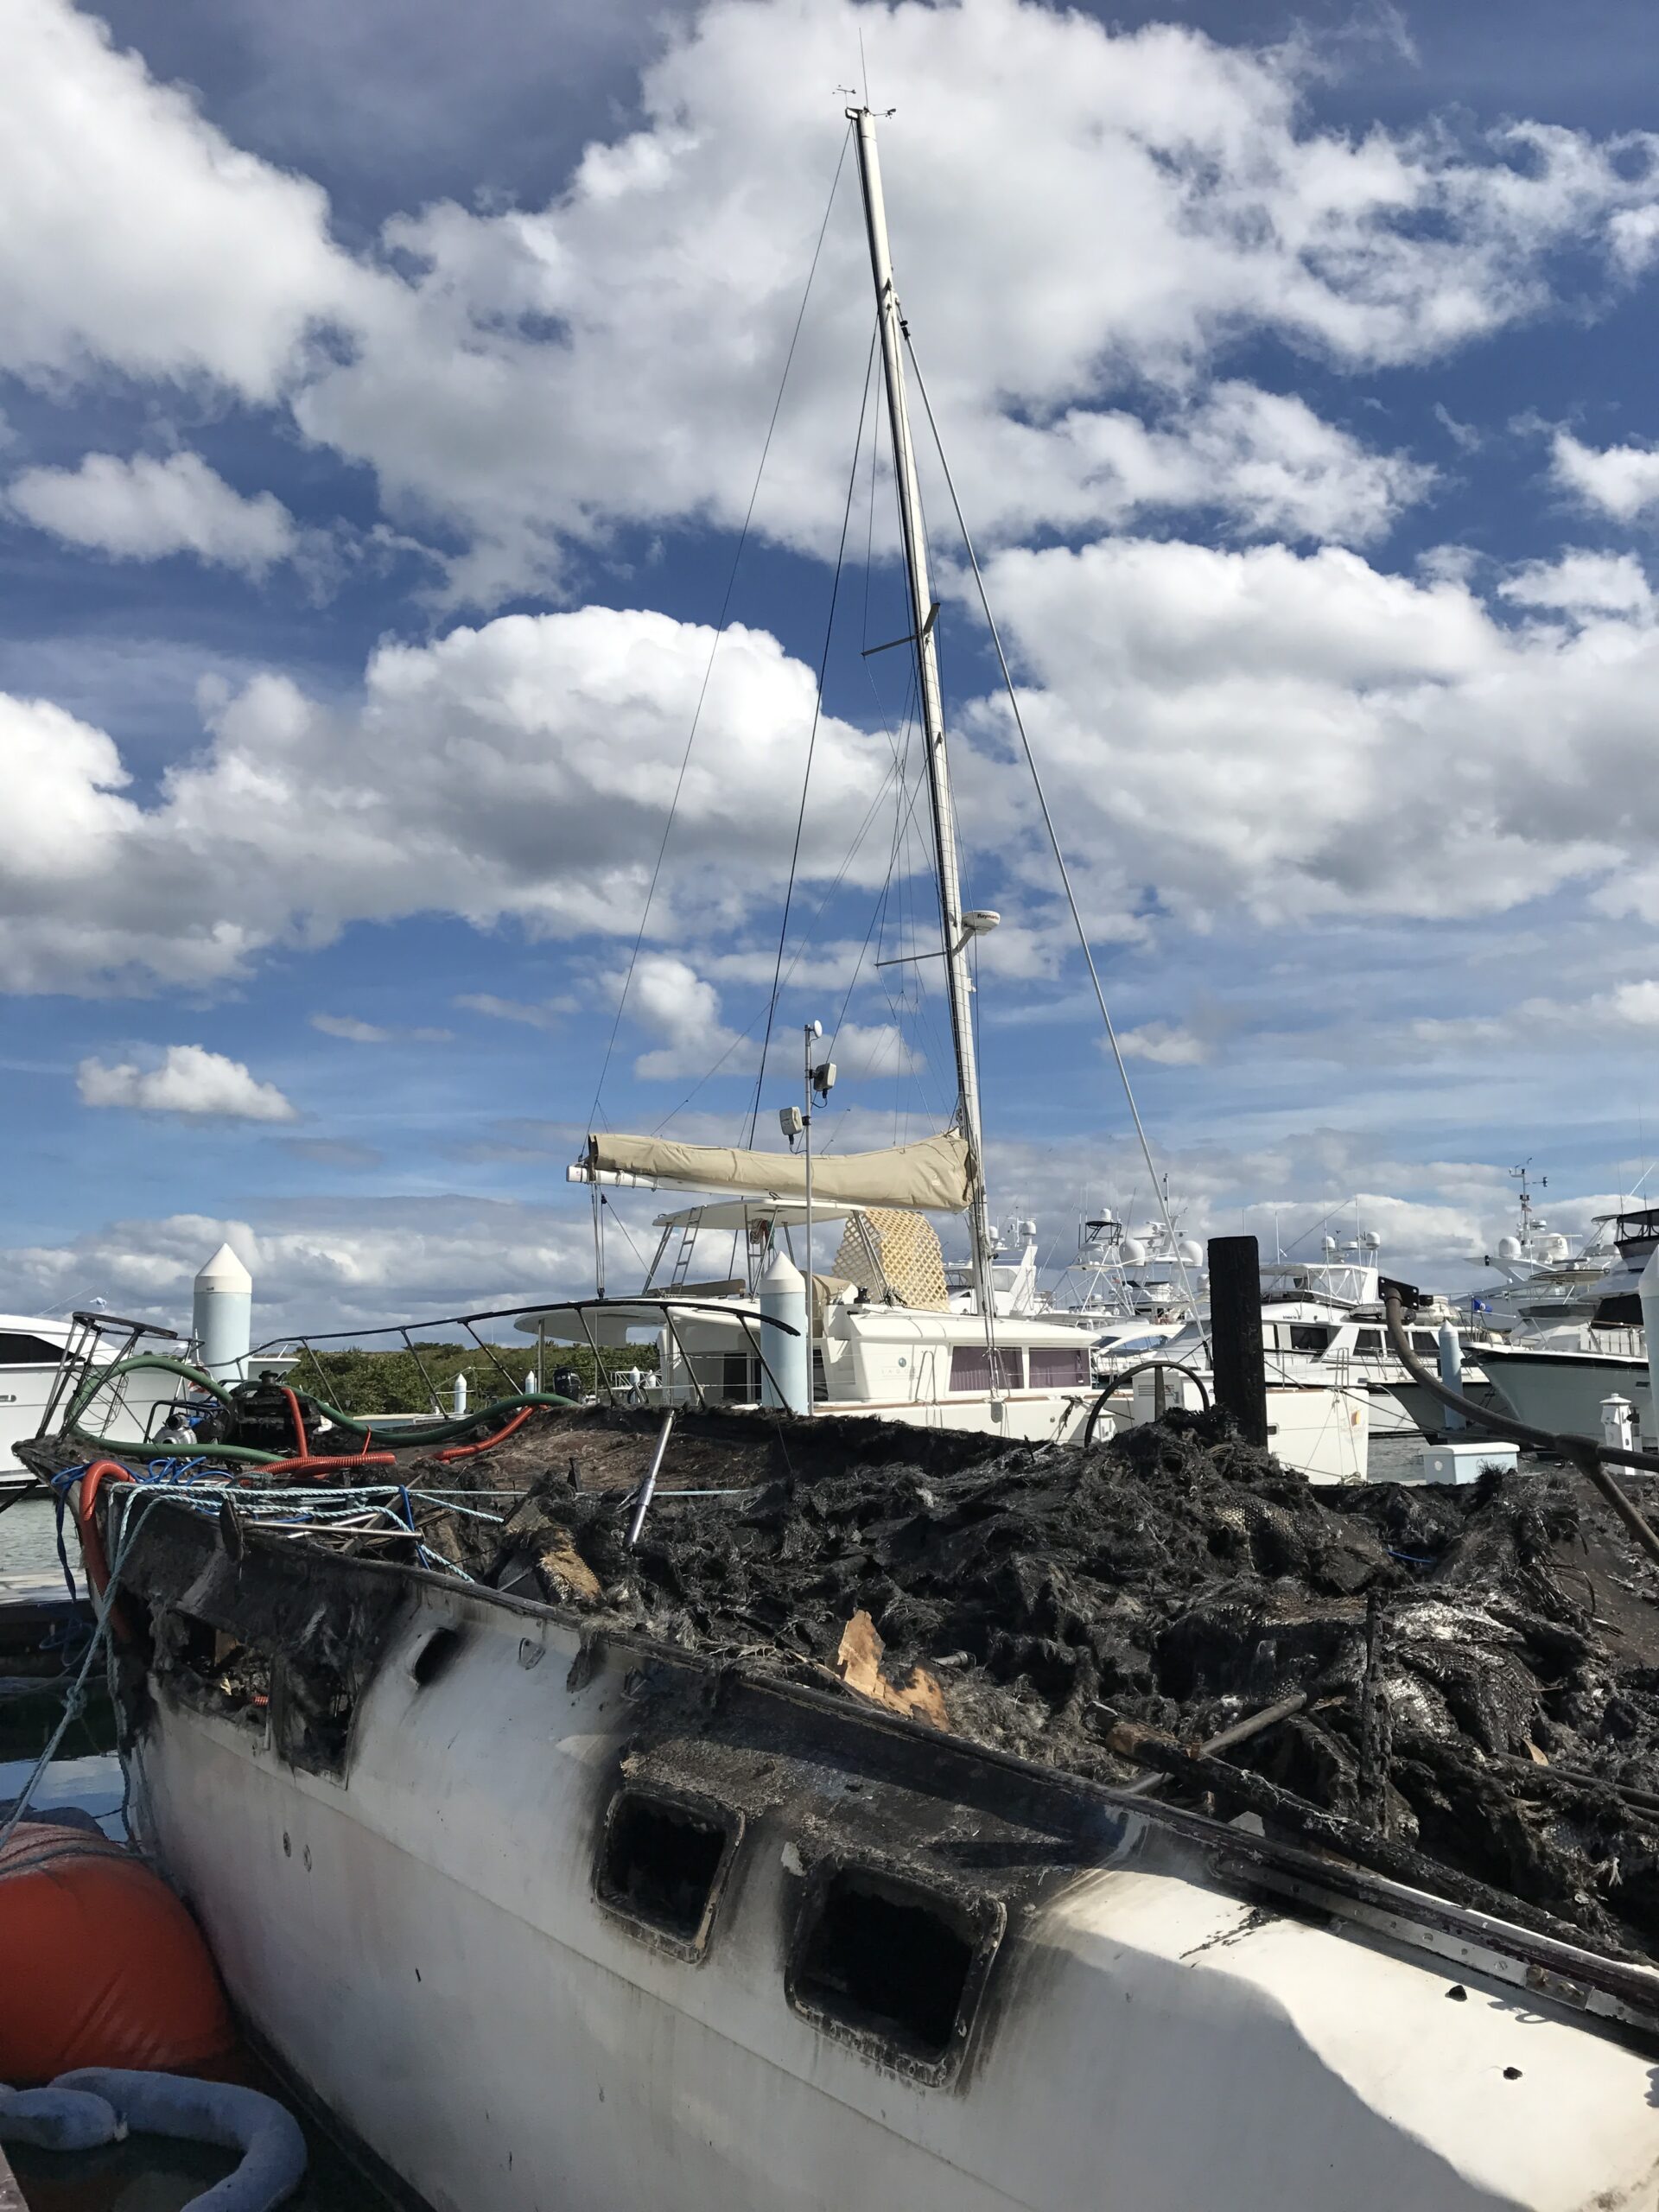 The shell of a boat which burned to the waterline sits in the foreground while the s/v Dawn Treader (a Lagoon 450 catamaran) is visible in the background.